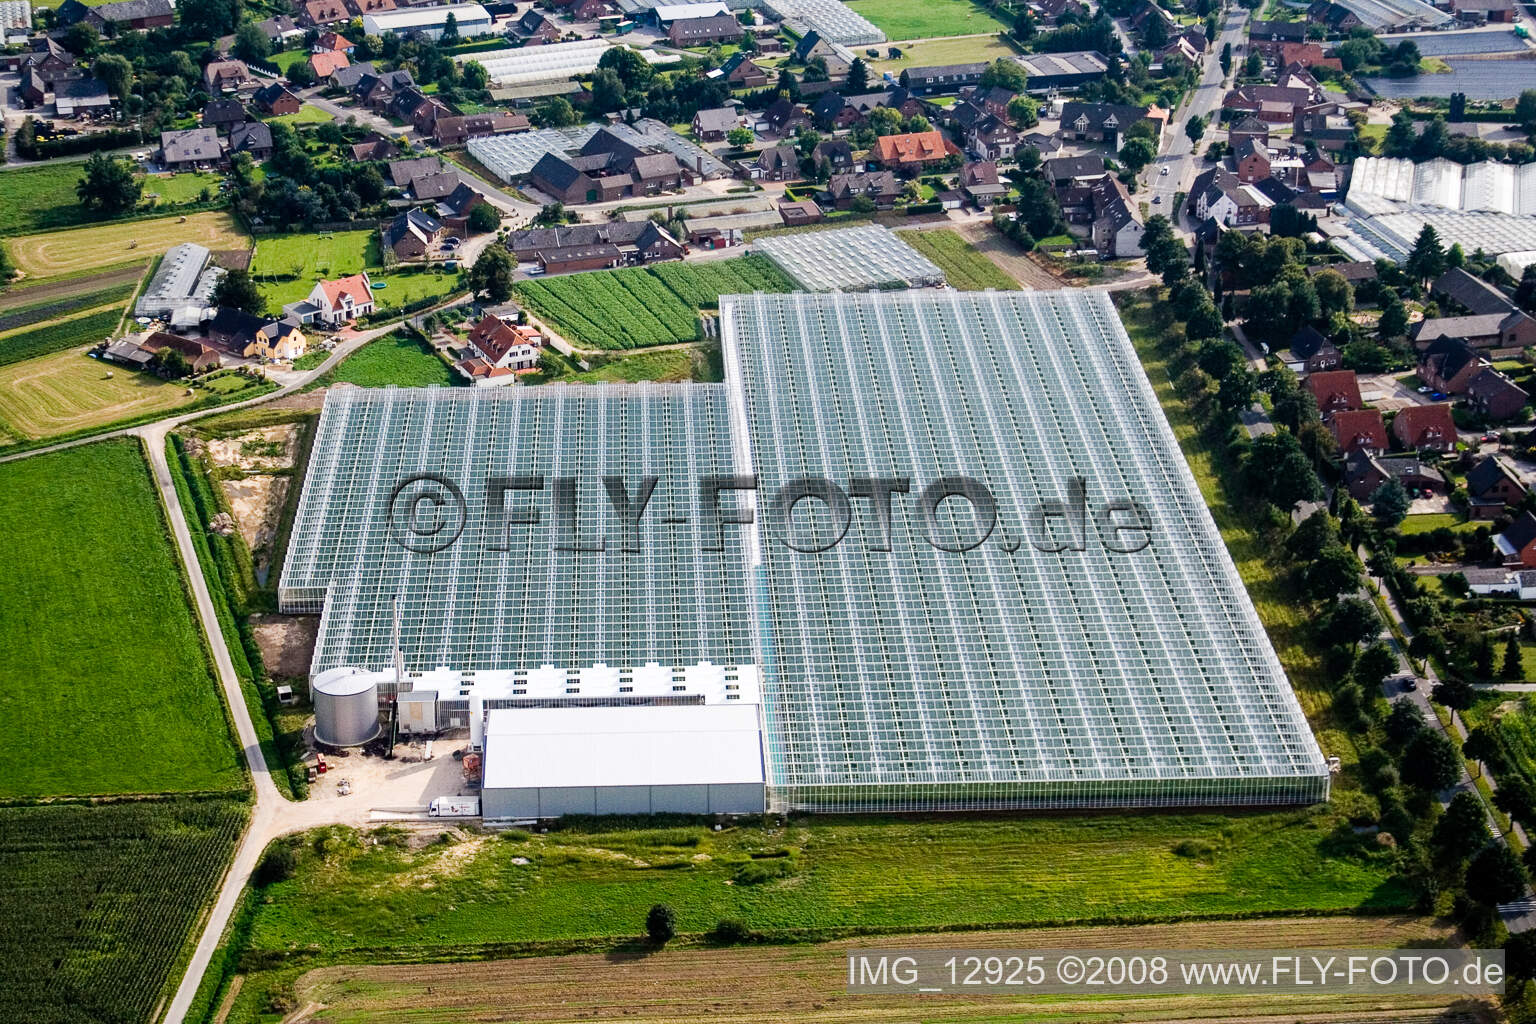 Glass roof surfaces in the greenhouse rows for Floriculture in Kerken in the state North Rhine-Westphalia, Germany